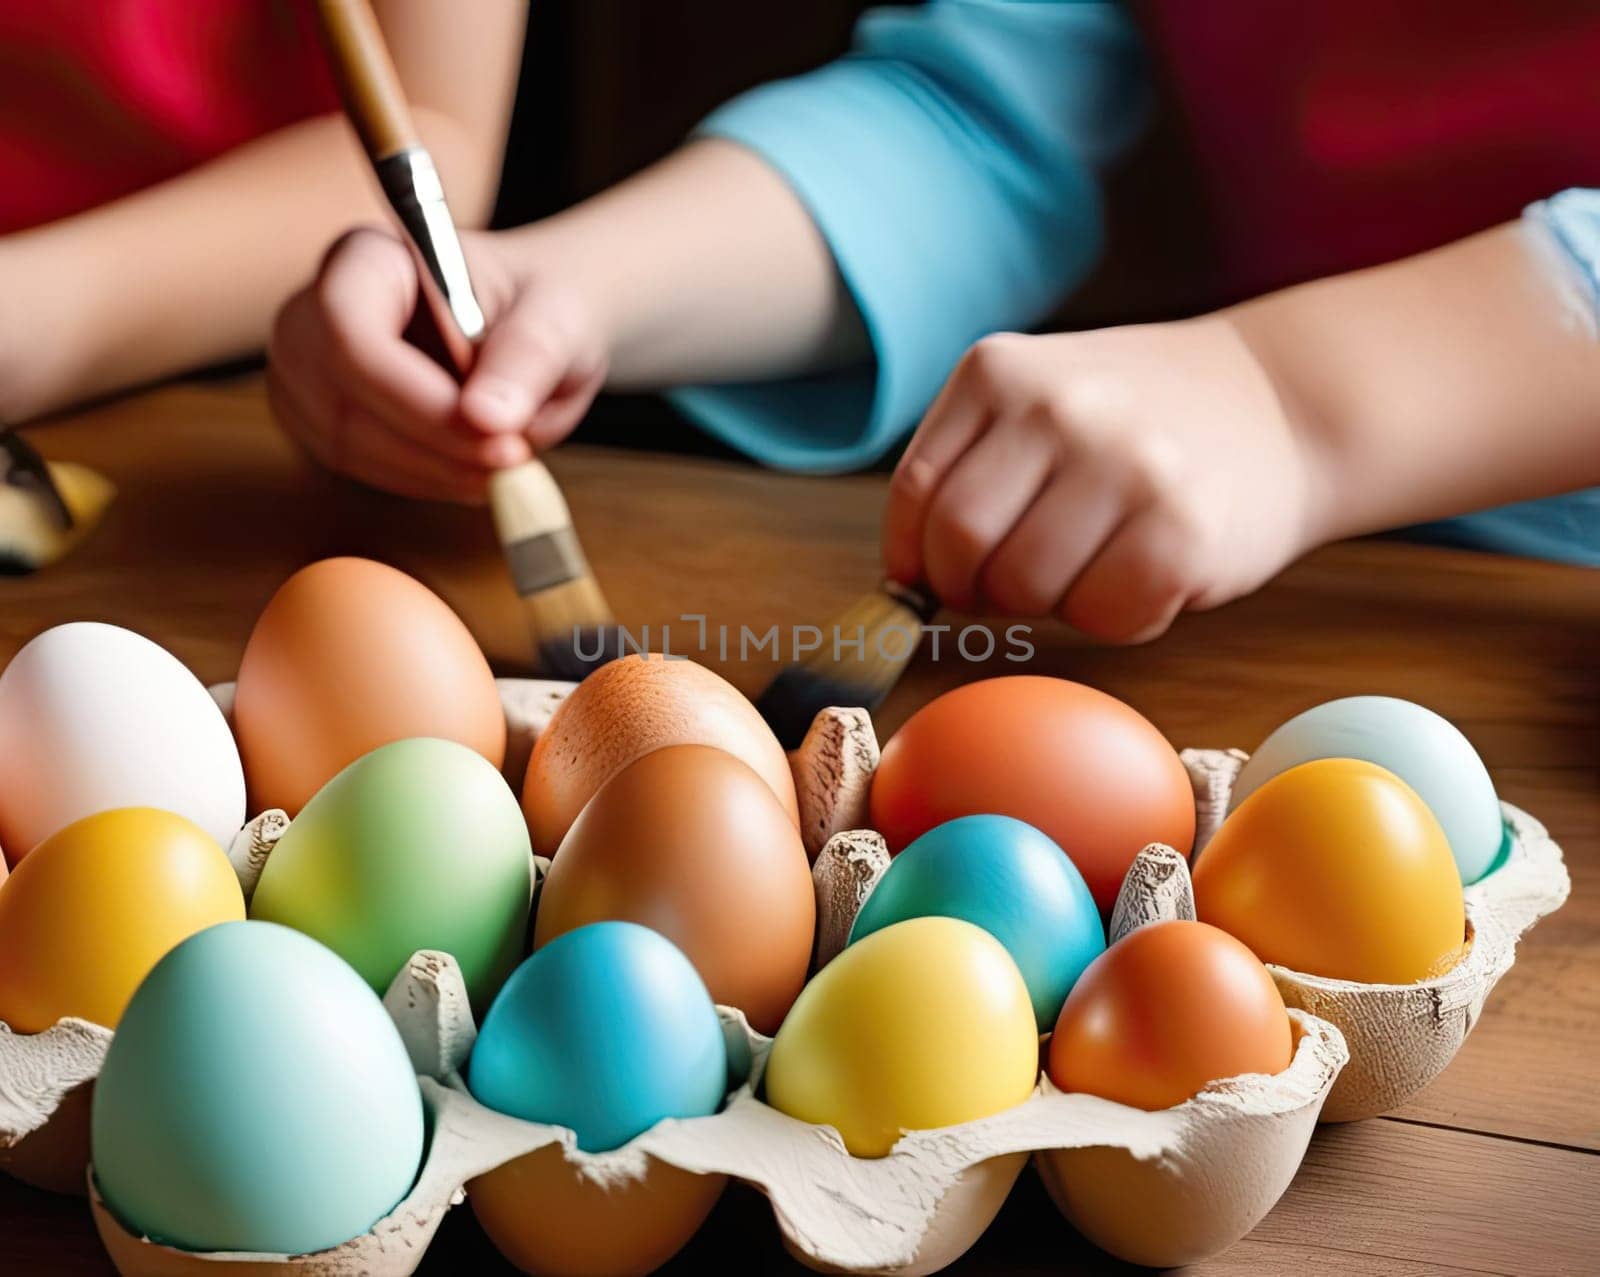 Banner, Easter concept. Multi-colored Easter eggs in a tray close-up. A woman's hand with a brush paints eggs for the holiday. With my own hands.